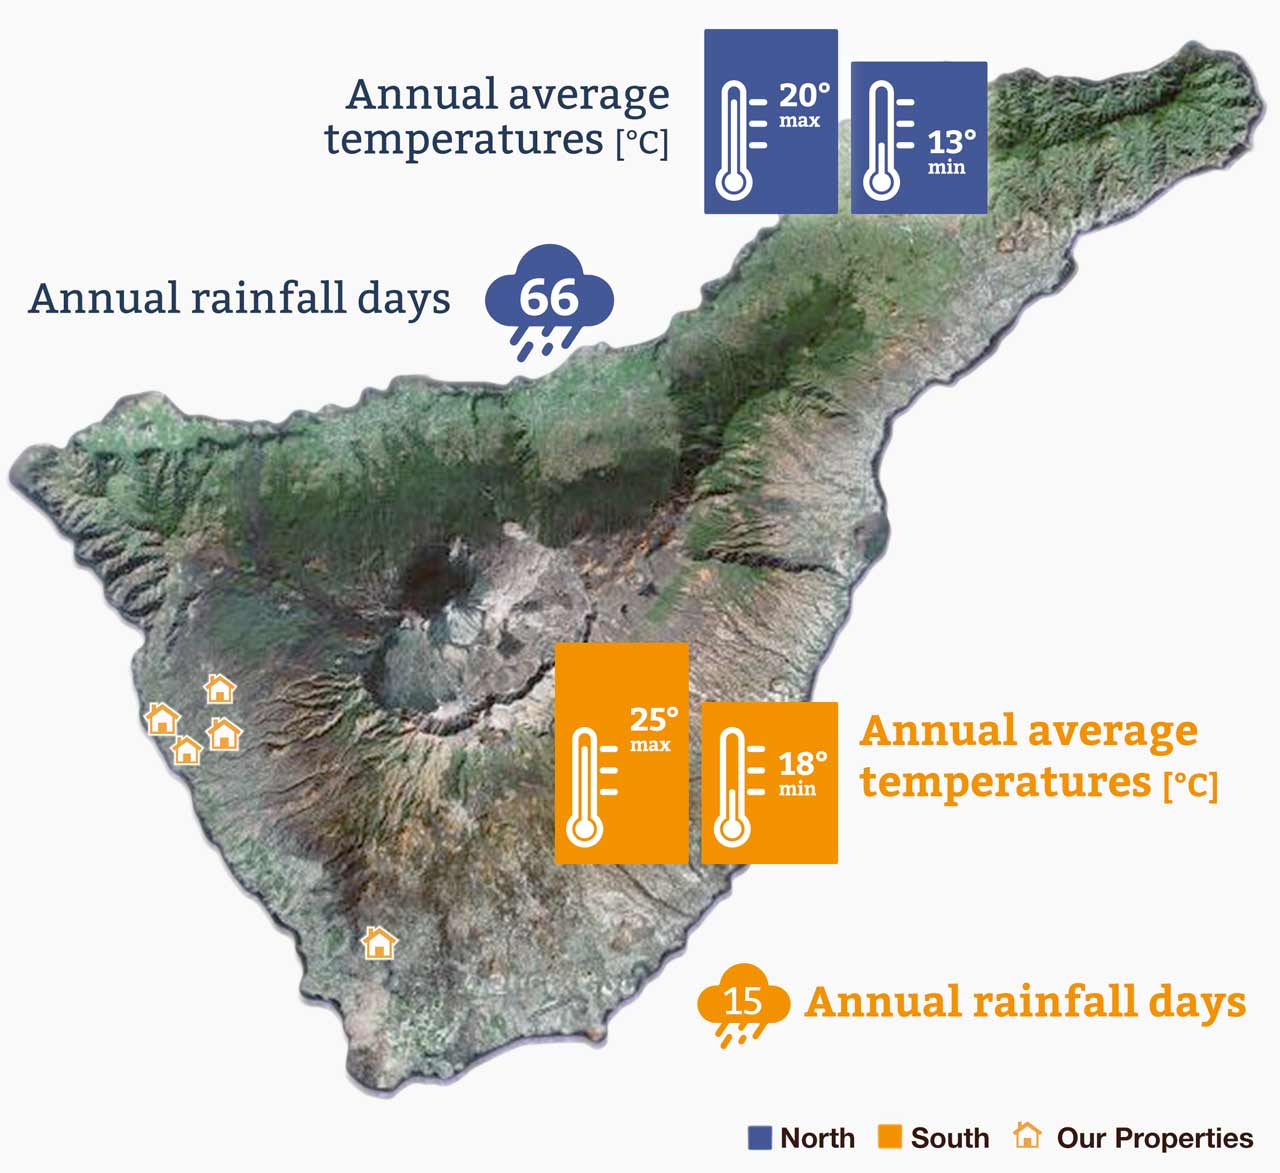 Difference in climate between Tenerife North and South